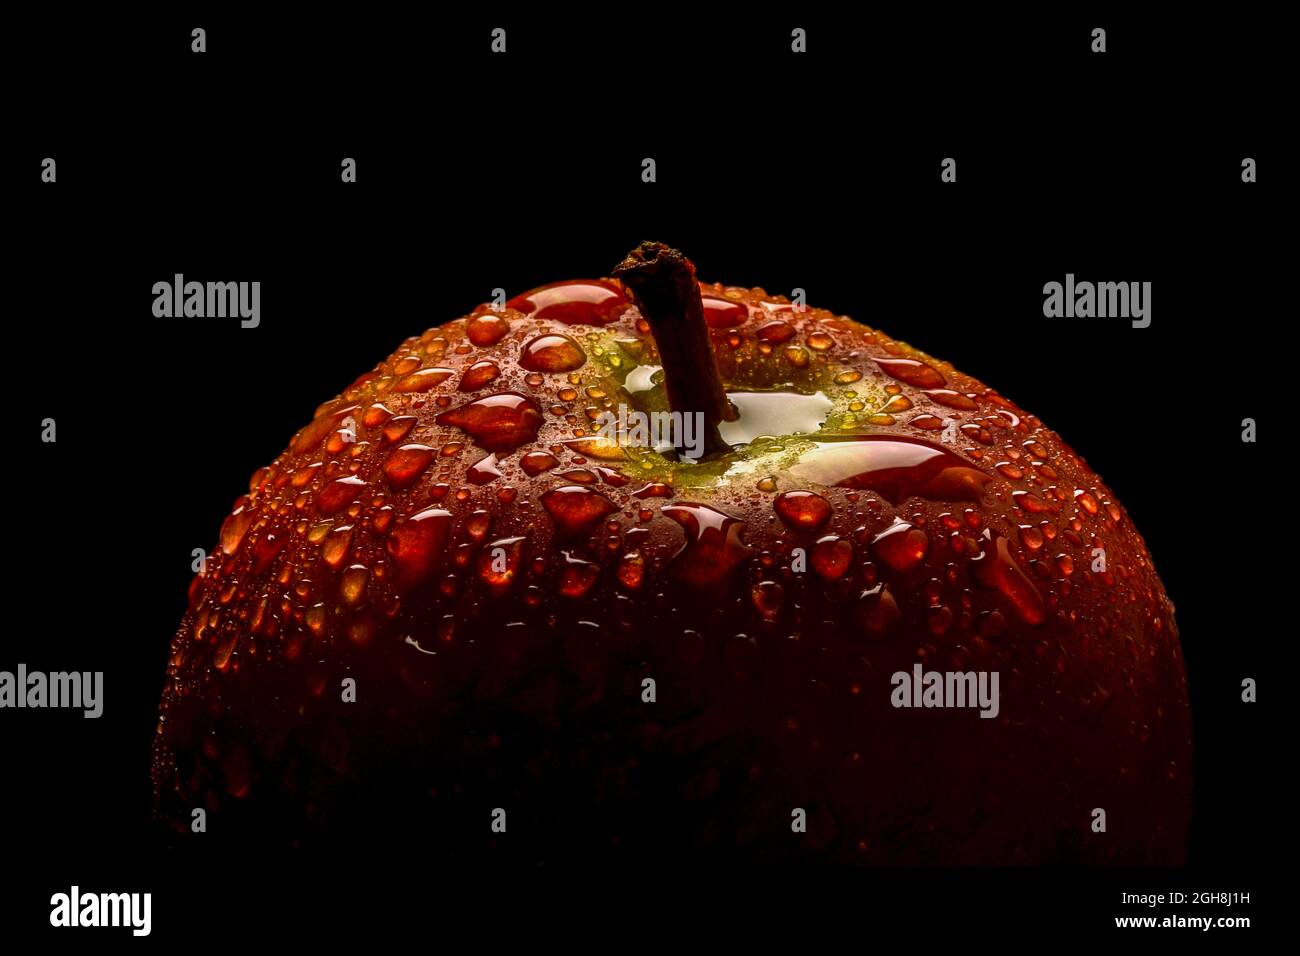 Apple with water droplets. Stock Photo